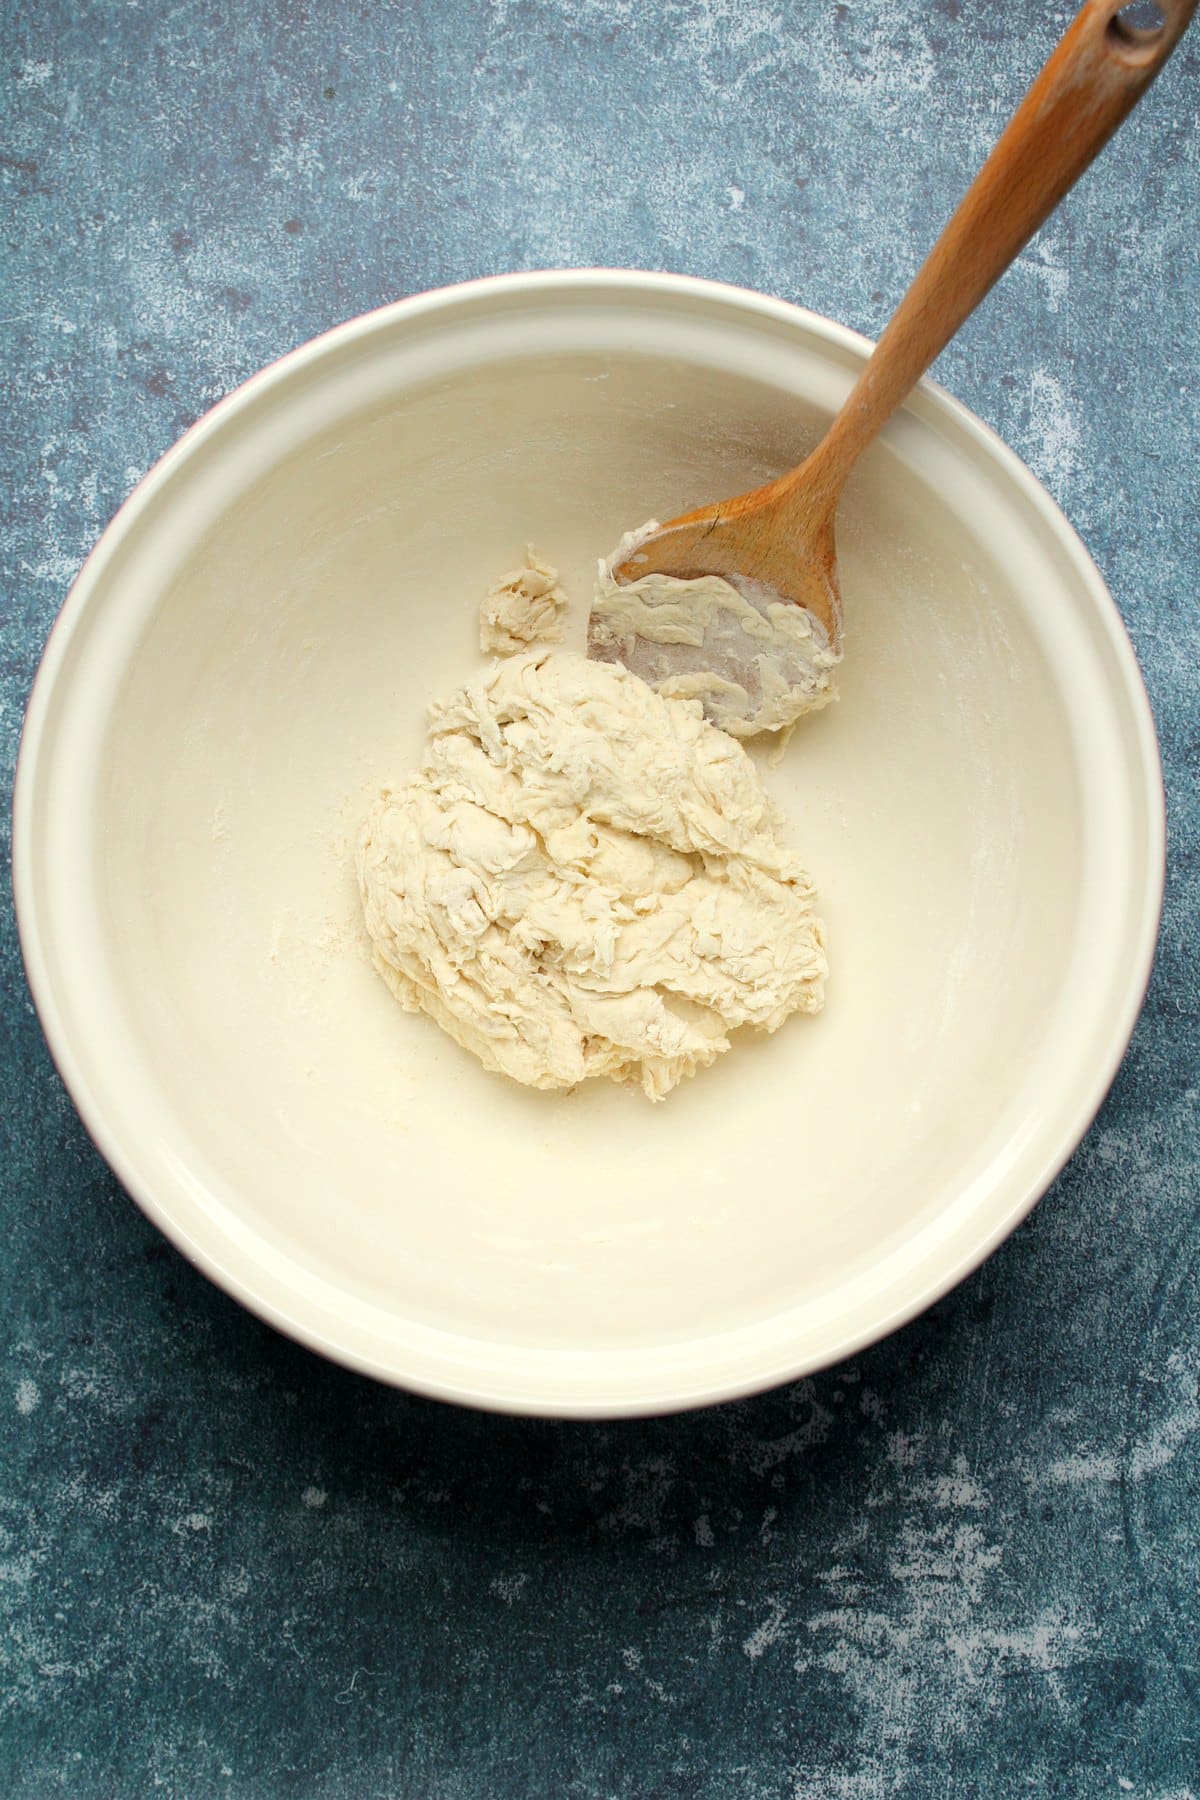 Wet ingredients added to bowl and mixed into a dough.